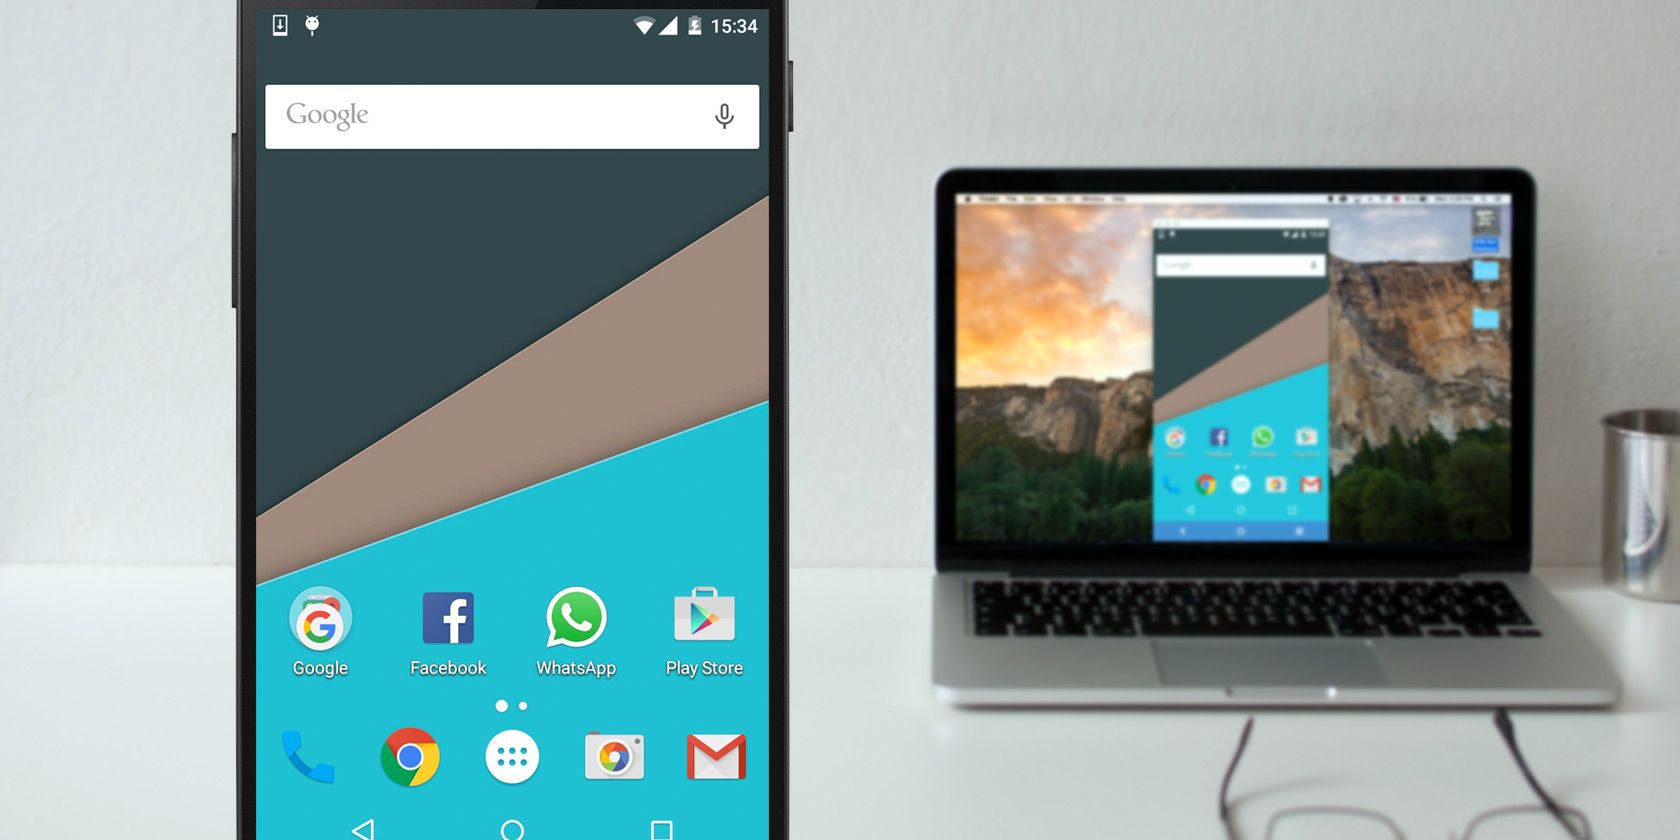 Mirror Your Android Screen To Pc Or Mac, How To Mirror Broken Android Screen On Pc